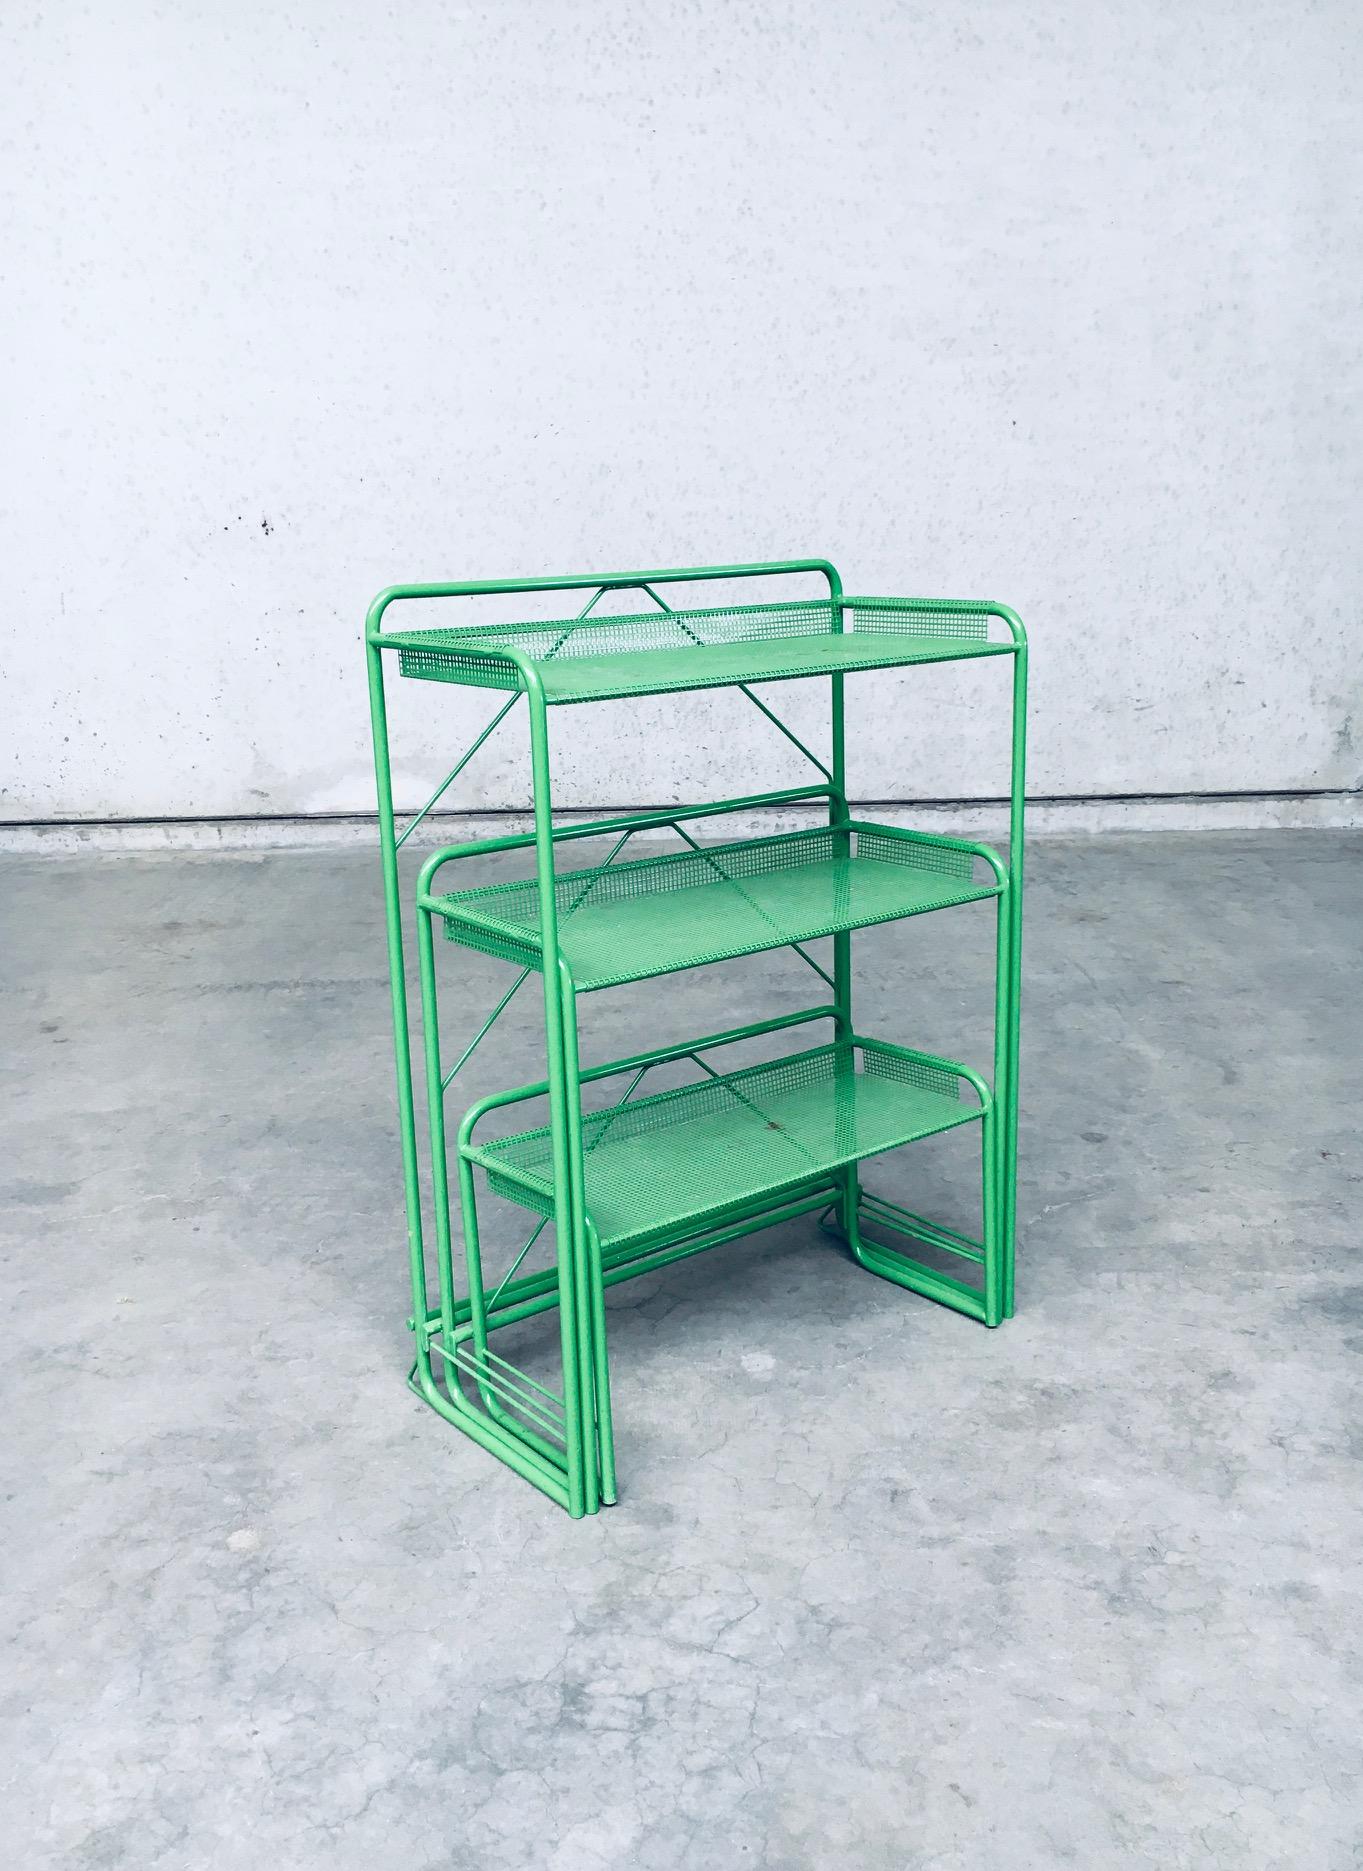 Industrial Design Green Lacquered Perforated Metal Plant Stand. Made in France, 1960's / 70's period. Green lacquered perforated steel sheets and metal wire constructed plant stand with 2 pull out levels on gliders. Well designed and constructed